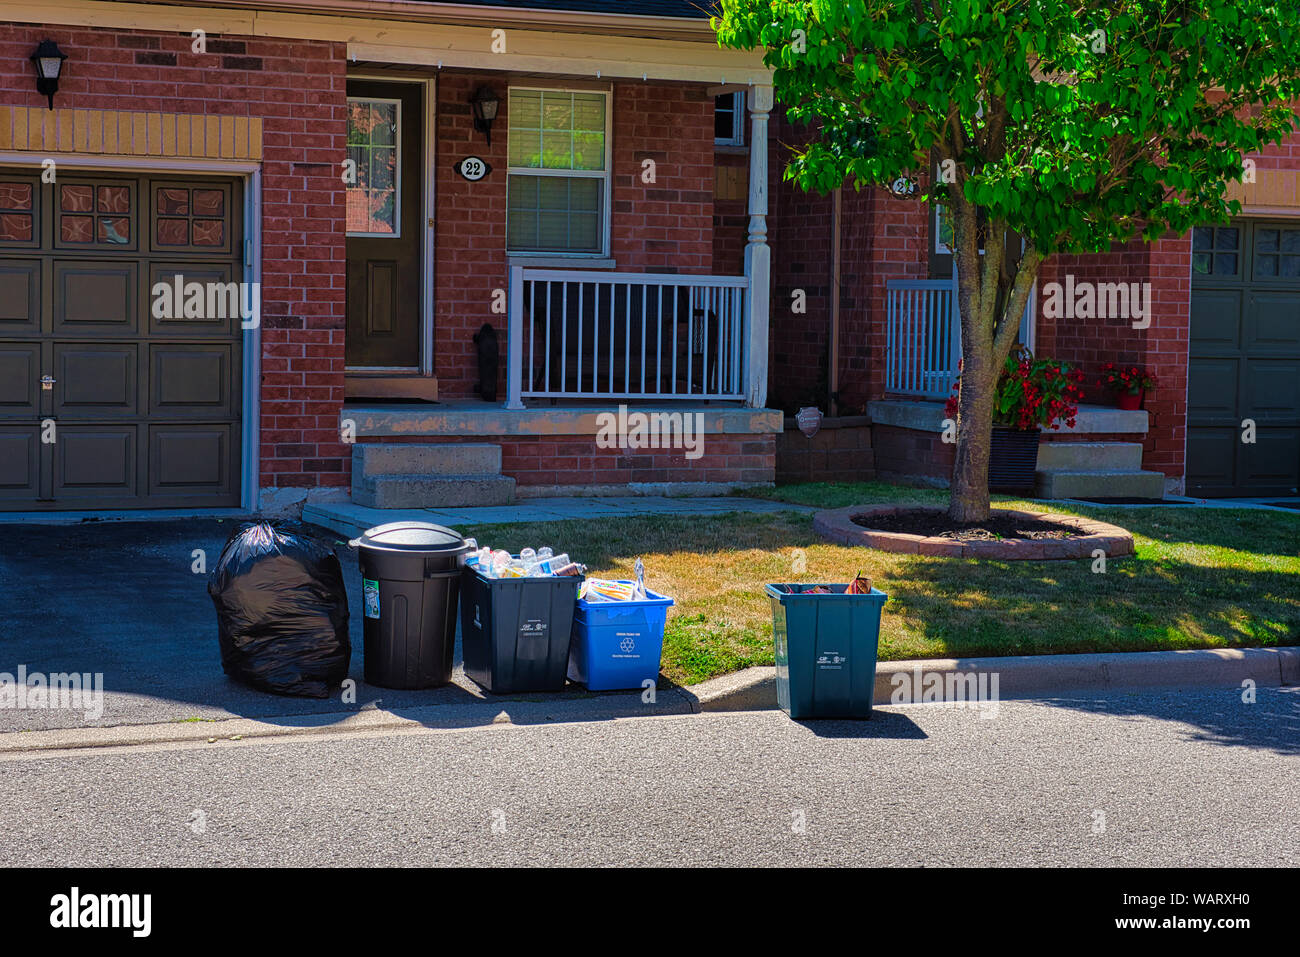 Garbage, recycling and food waste bins are waiting to be picked up in front of a house on garbage day. Stock Photo